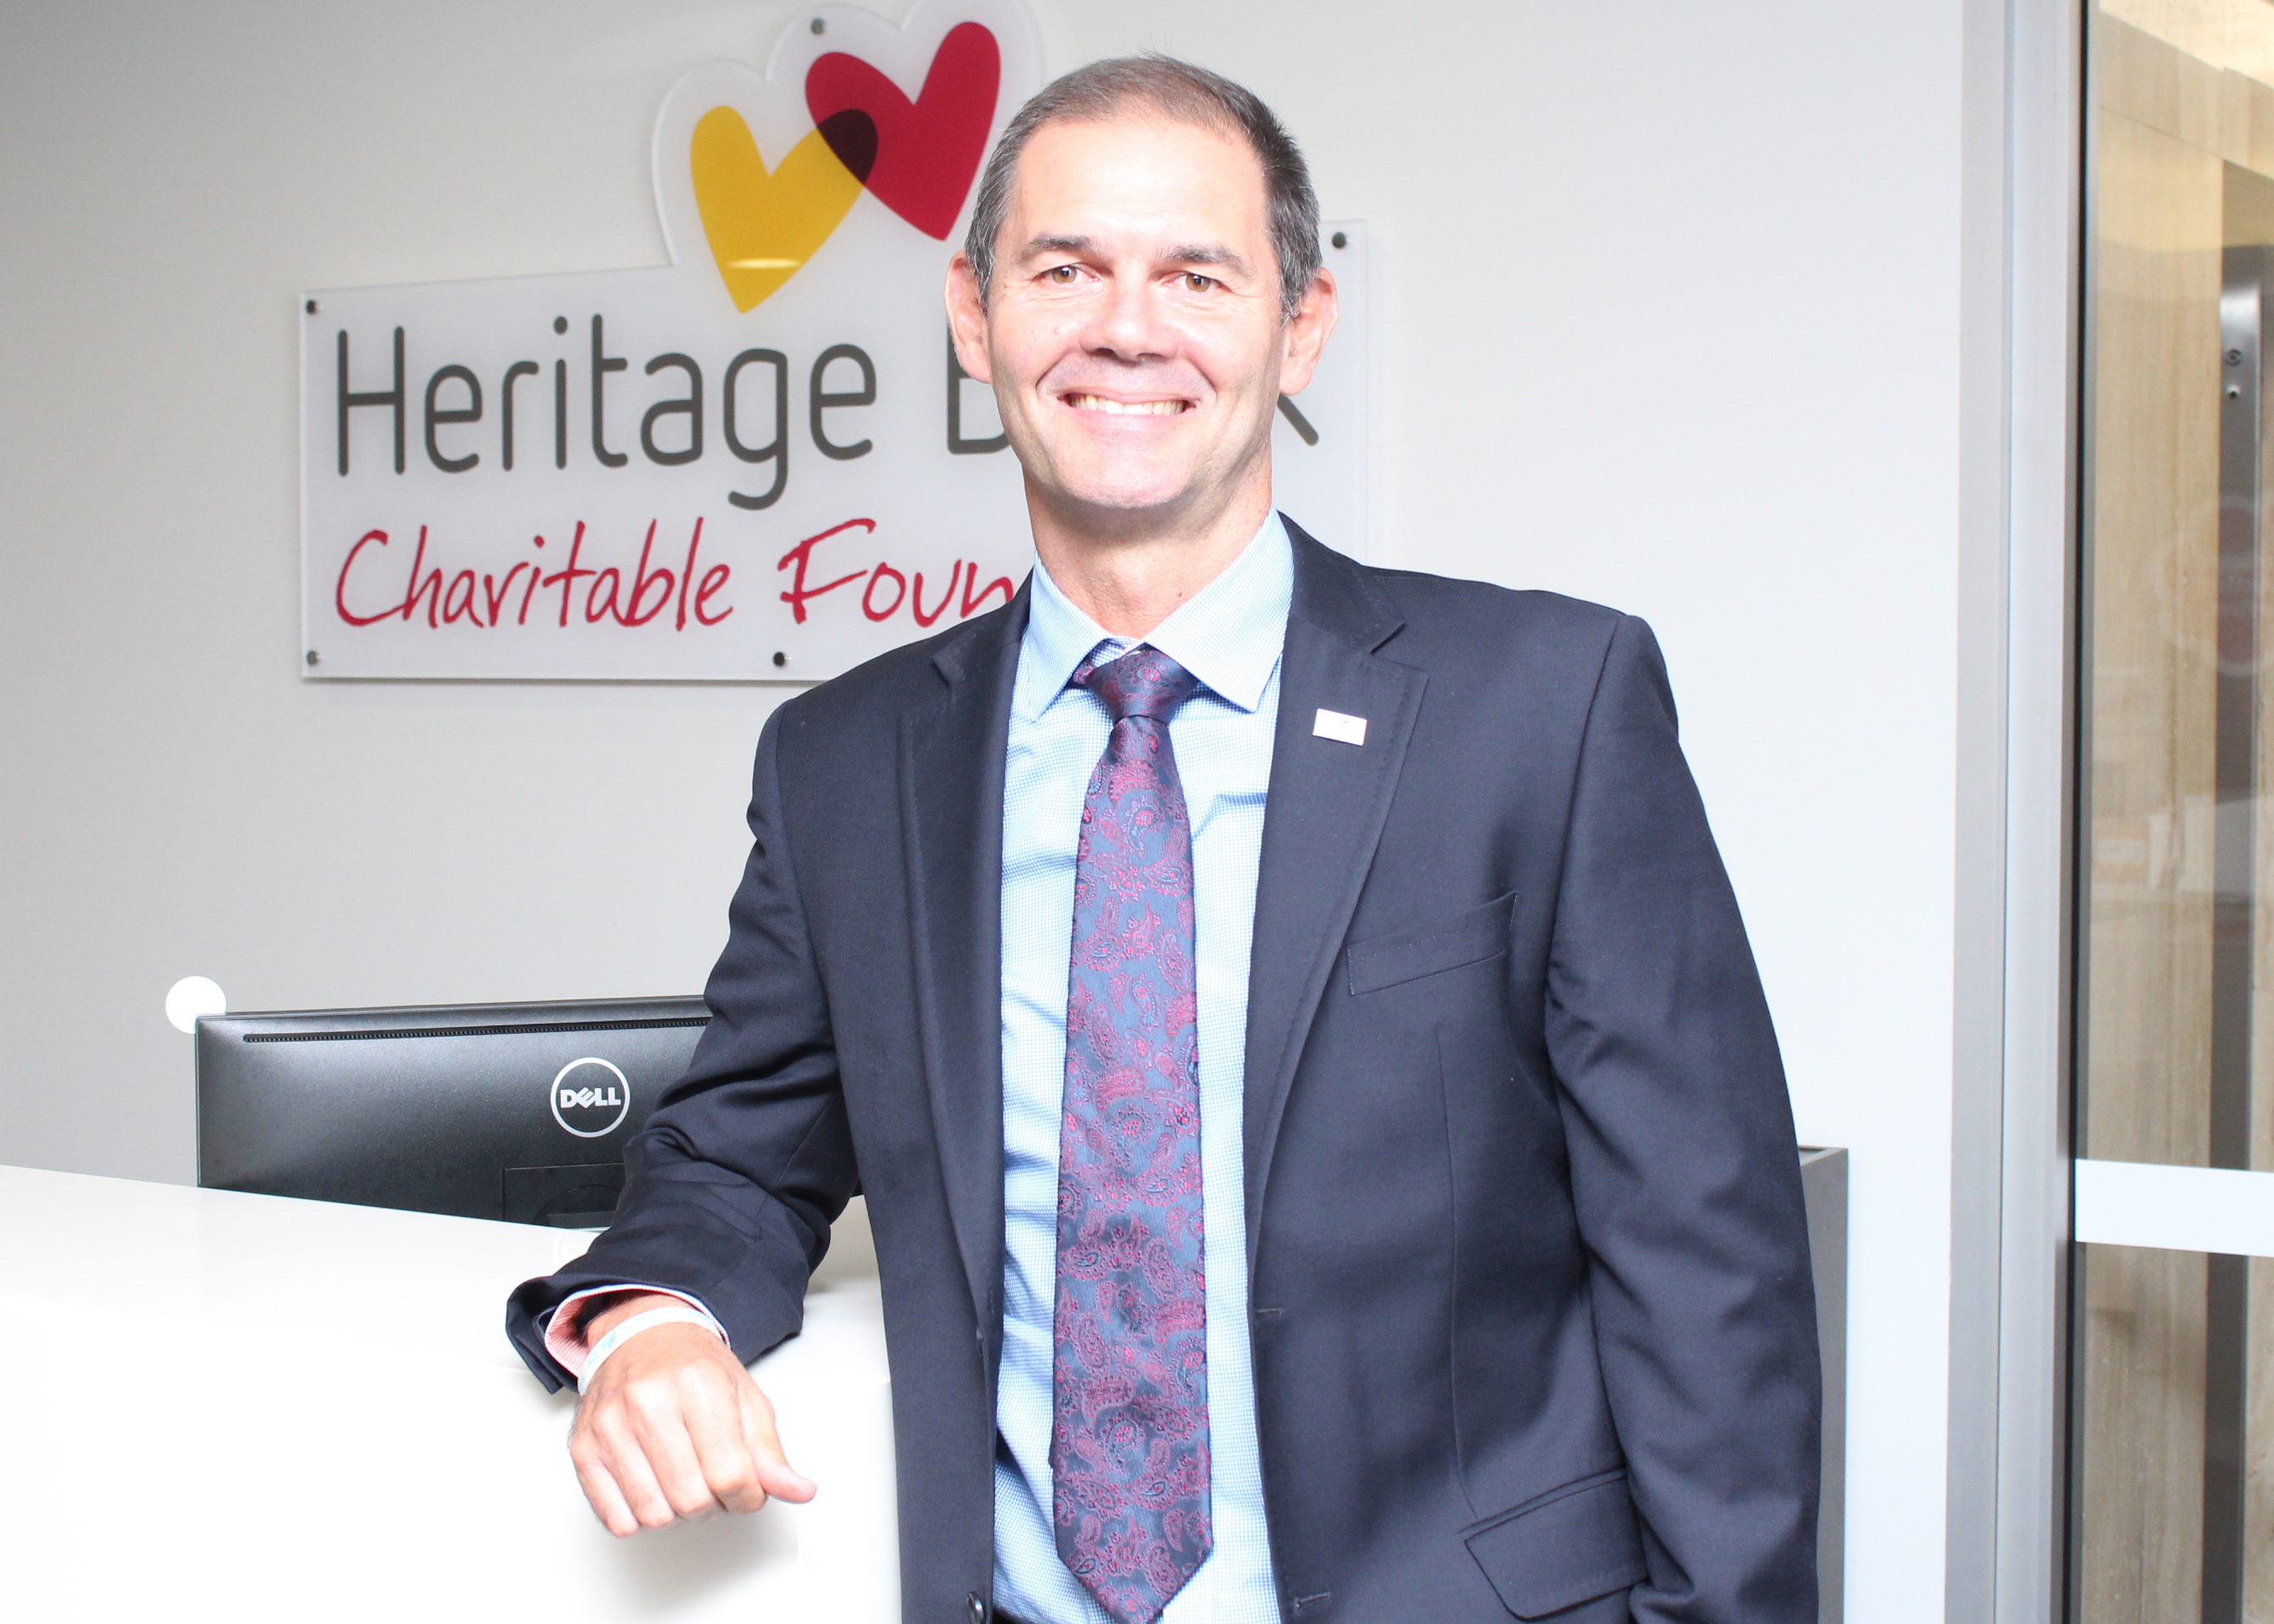 Executive Officer Heritage Bank Charitable Foundation - Mr Paul Olds